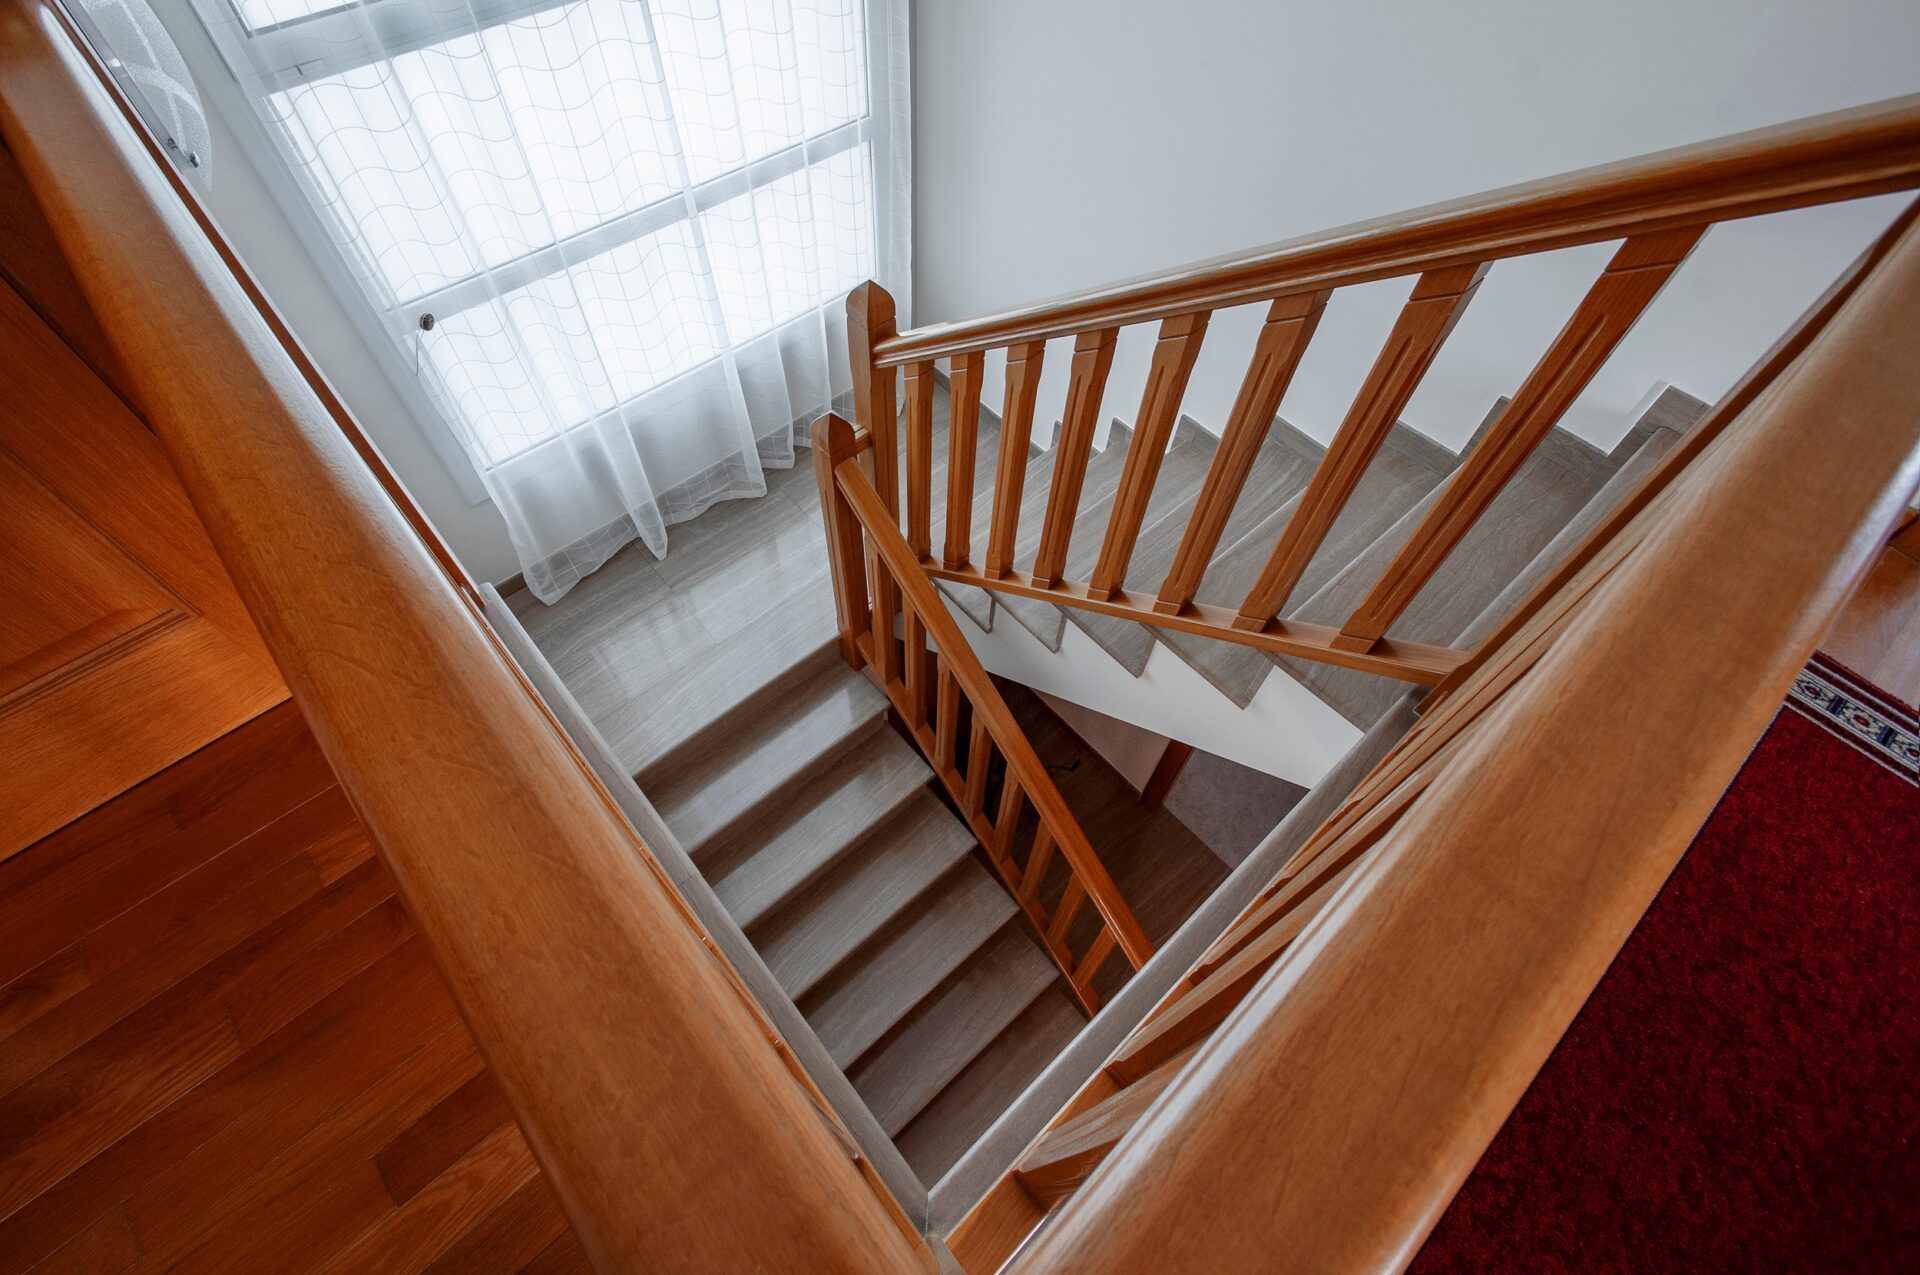 Stair case with landing